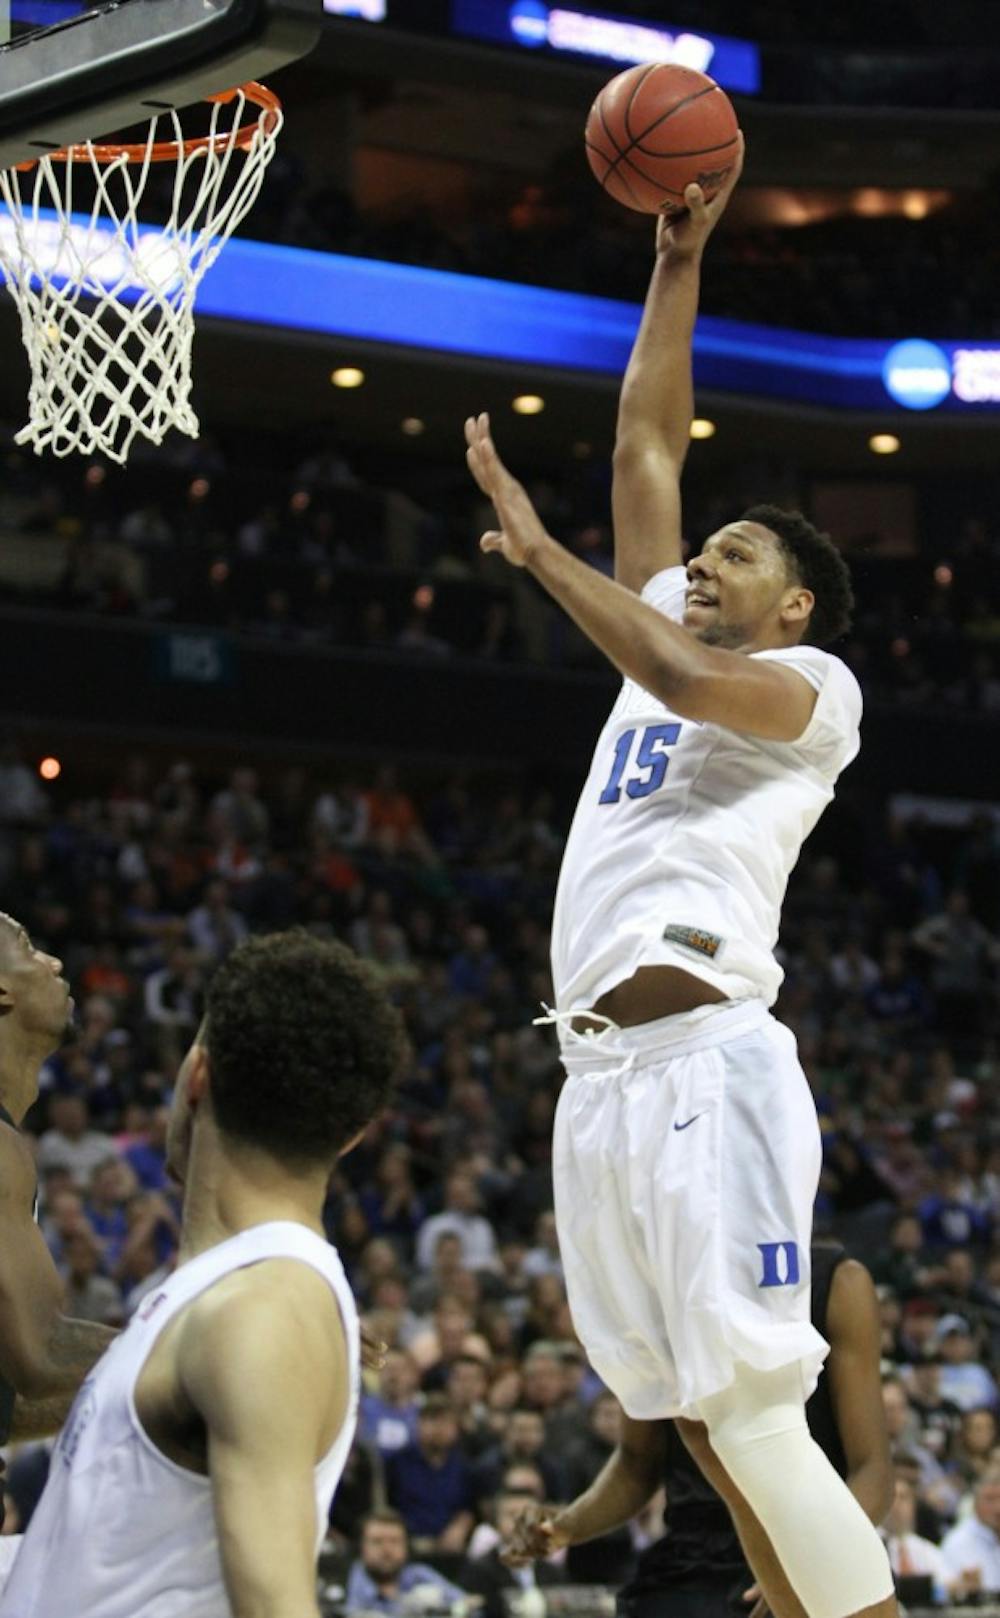 Jahlil Okafor threw down a big dunk in transition to help fuel Duke's quick start.